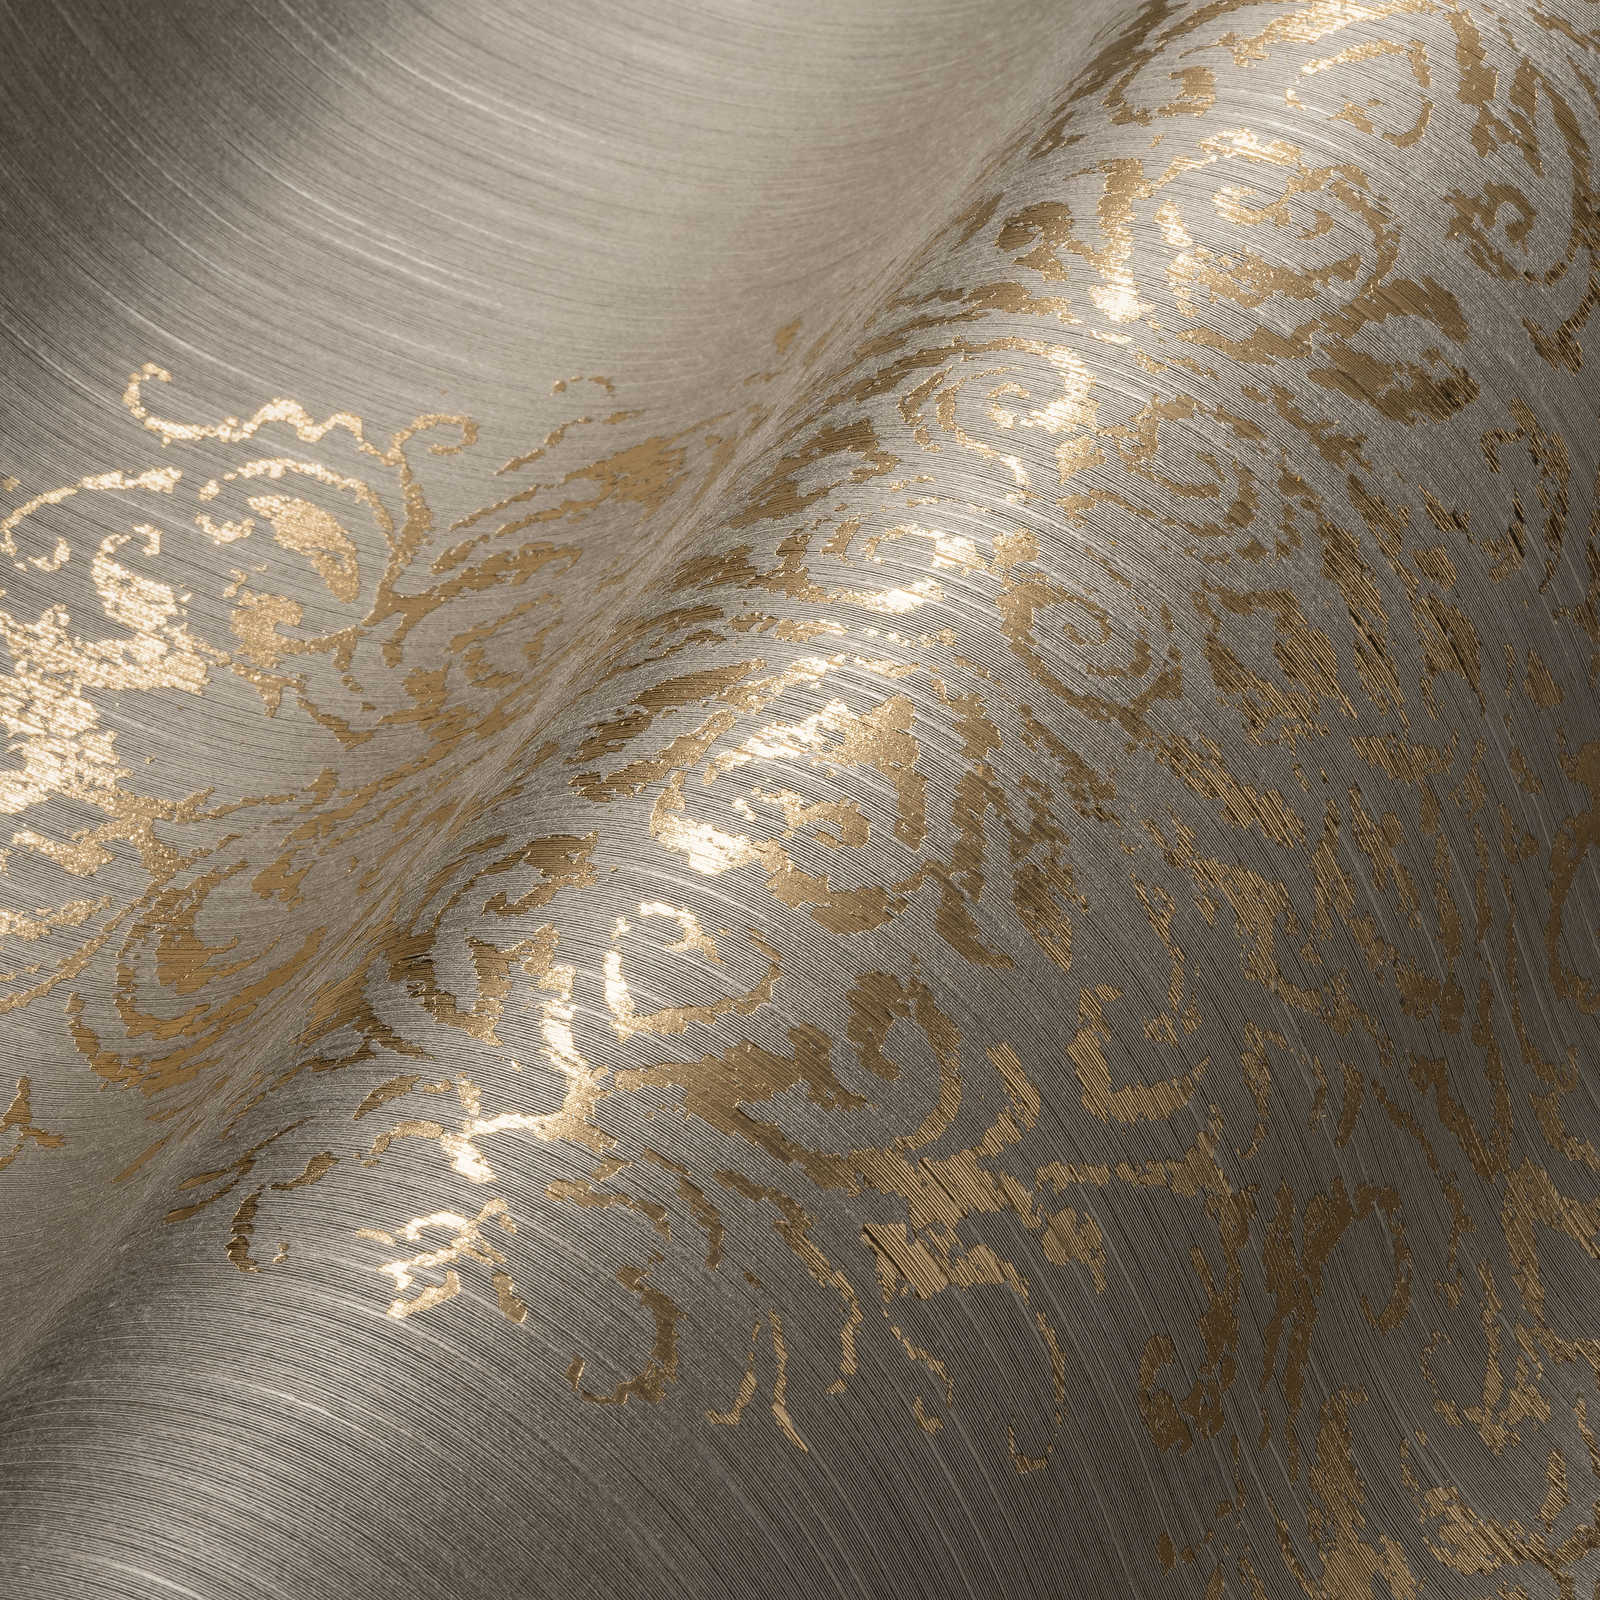             Ornament wallpaper with metallic effect in used look - beige, gold
        